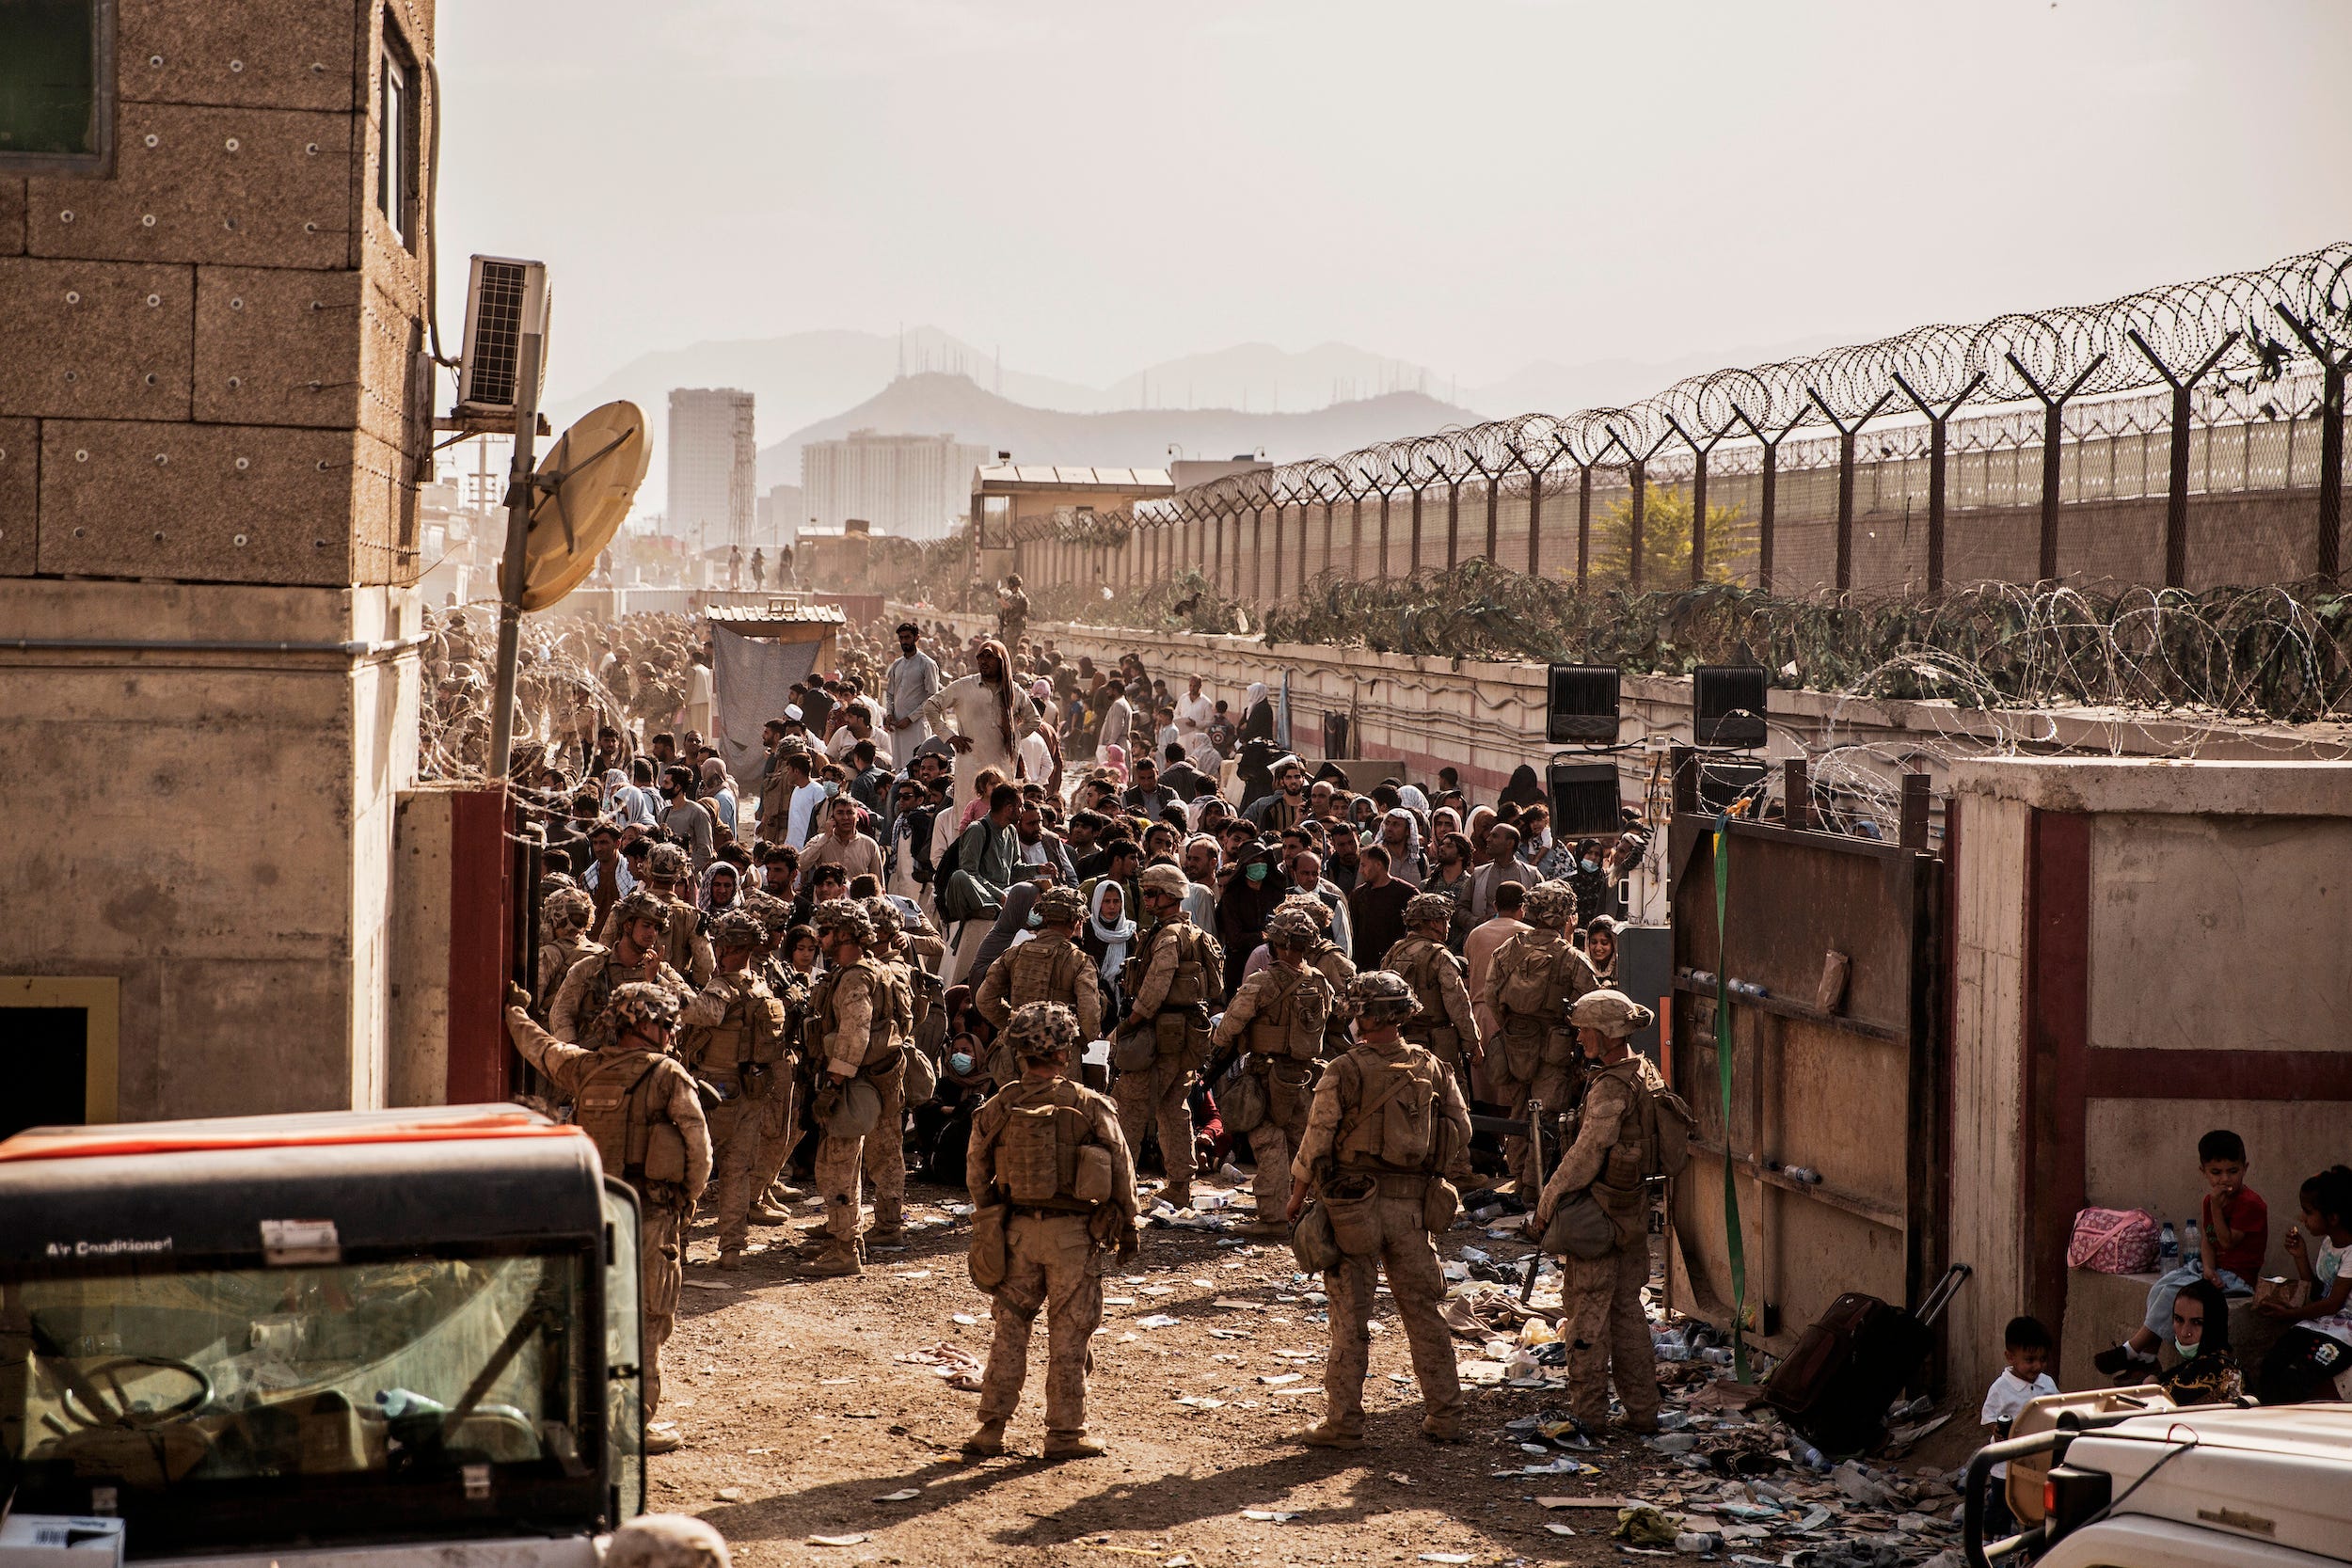 us soldiers face a crowd at a checkpoint with a large fence on either side of them